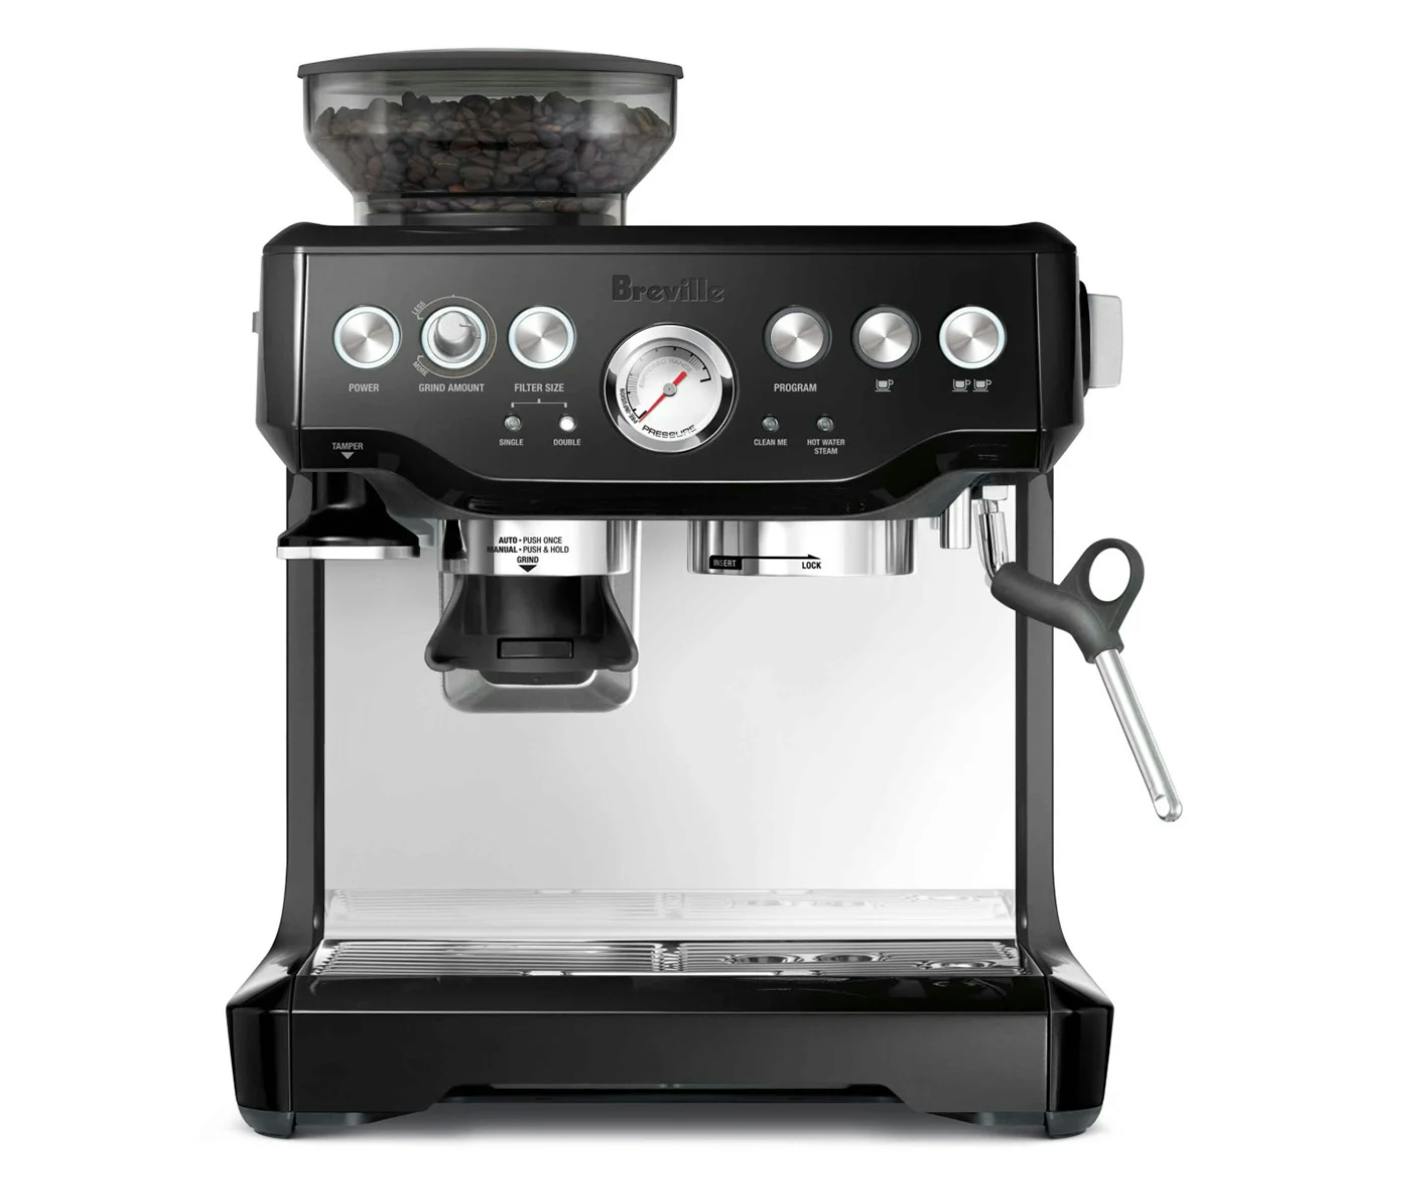 Product image of the Breville Barista Express.